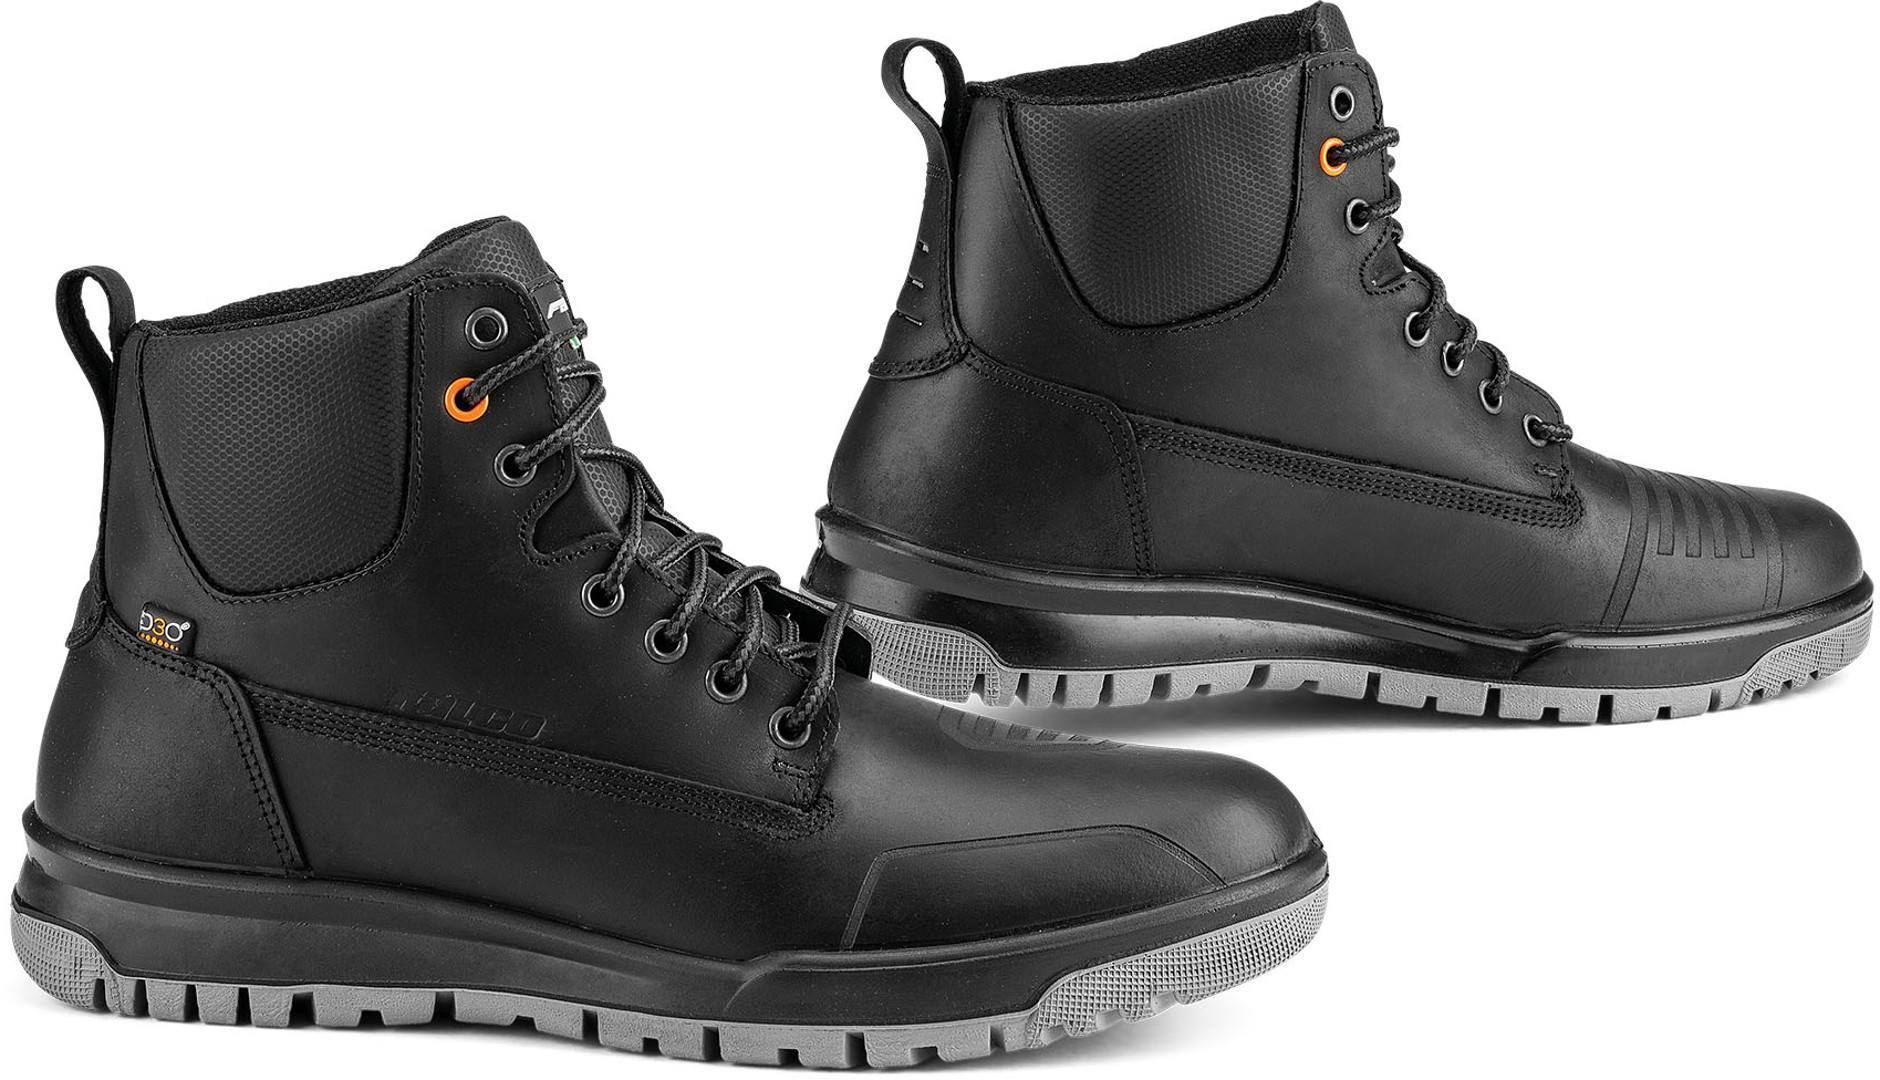 Photos - Motorcycle Boots Falco Patrol Motorcycle Shoes Unisex Black Size: 41 5050874141 